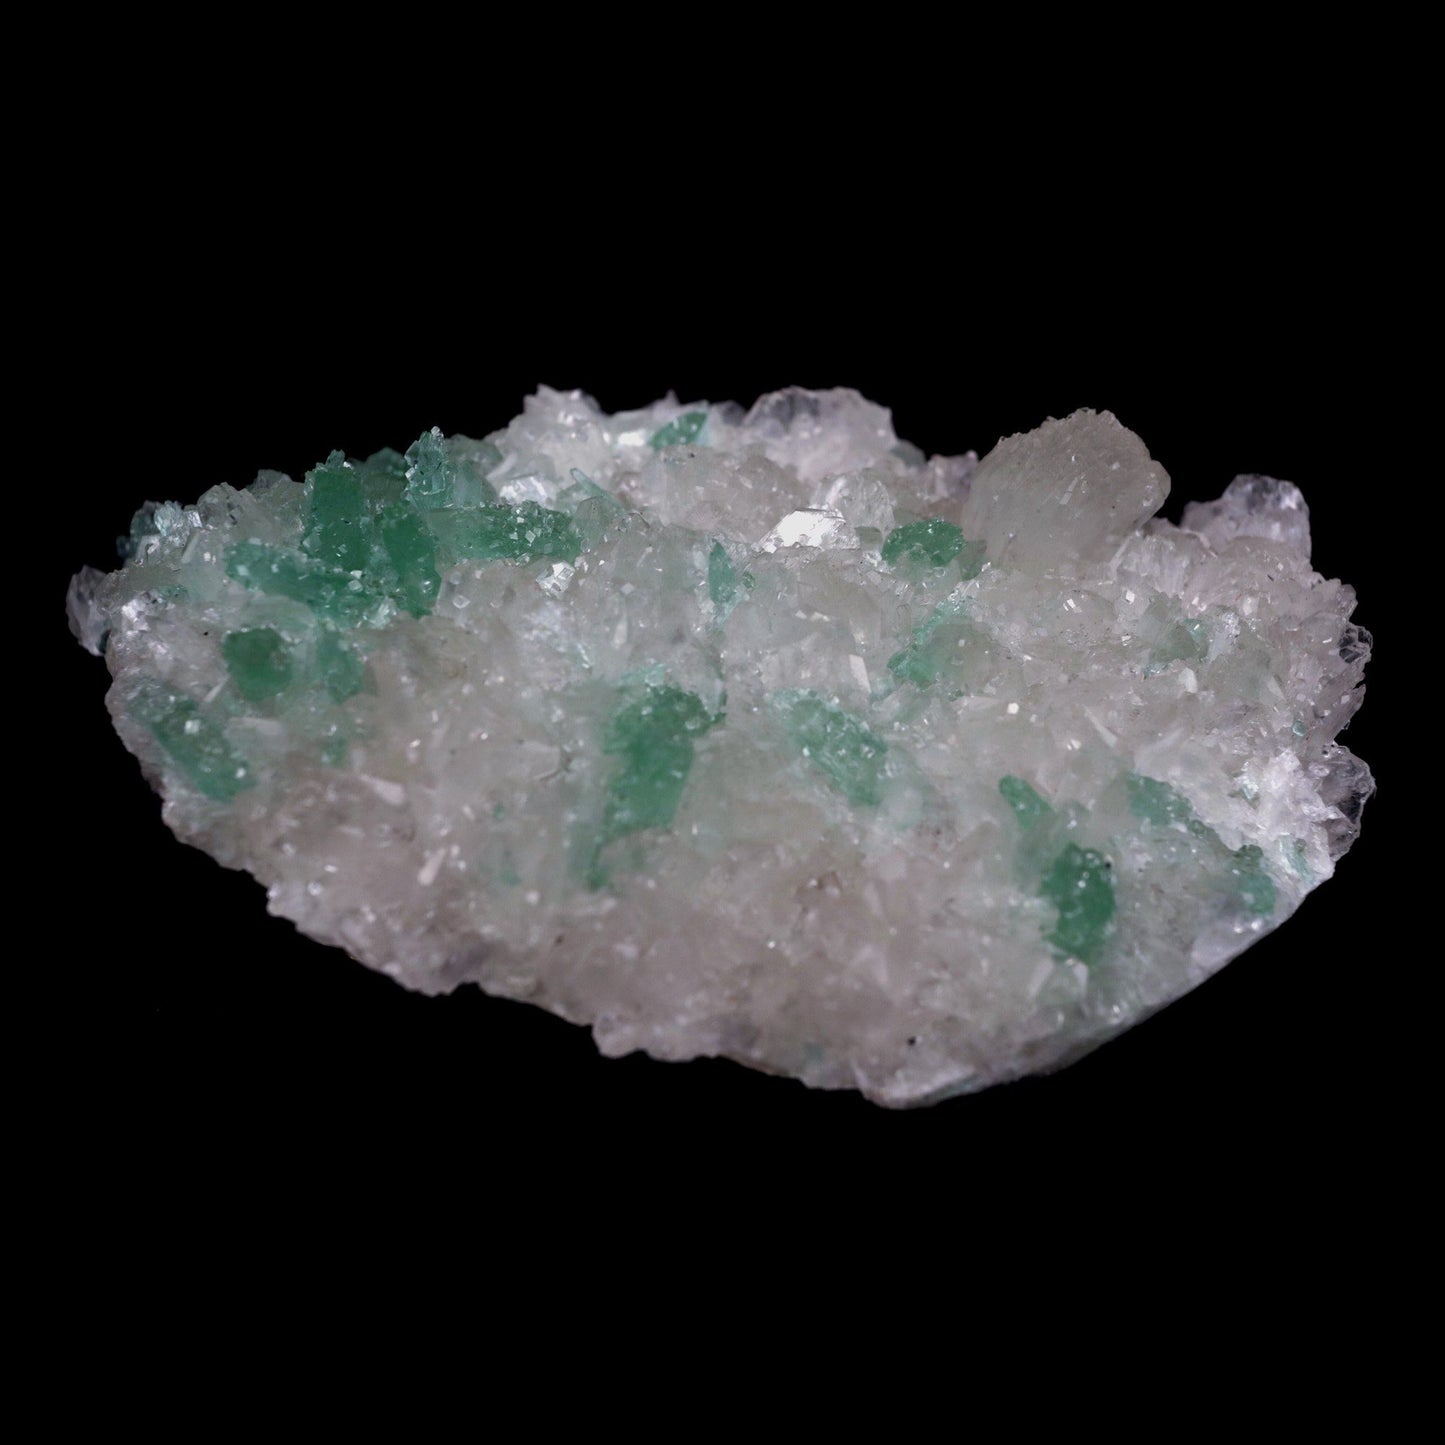 Green Apophyllite Crystals with Stilbite Big Cluster Natural Mineral S…  https://www.superbminerals.us/products/green-apophyllite-crystals-with-stilbite-big-cluster-natural-mineral-specimen-b-4785  Features: Large basalt matrices coated in strikingly beautiful two-toned gemmy tetragonal apophyllite crystals have beautiful starbursts, sprays, and clusters of gemmy, creamy stilbite blades strewn throughout them. The rich mint-green bodies of the apophyllite crystals are terminated by colourless